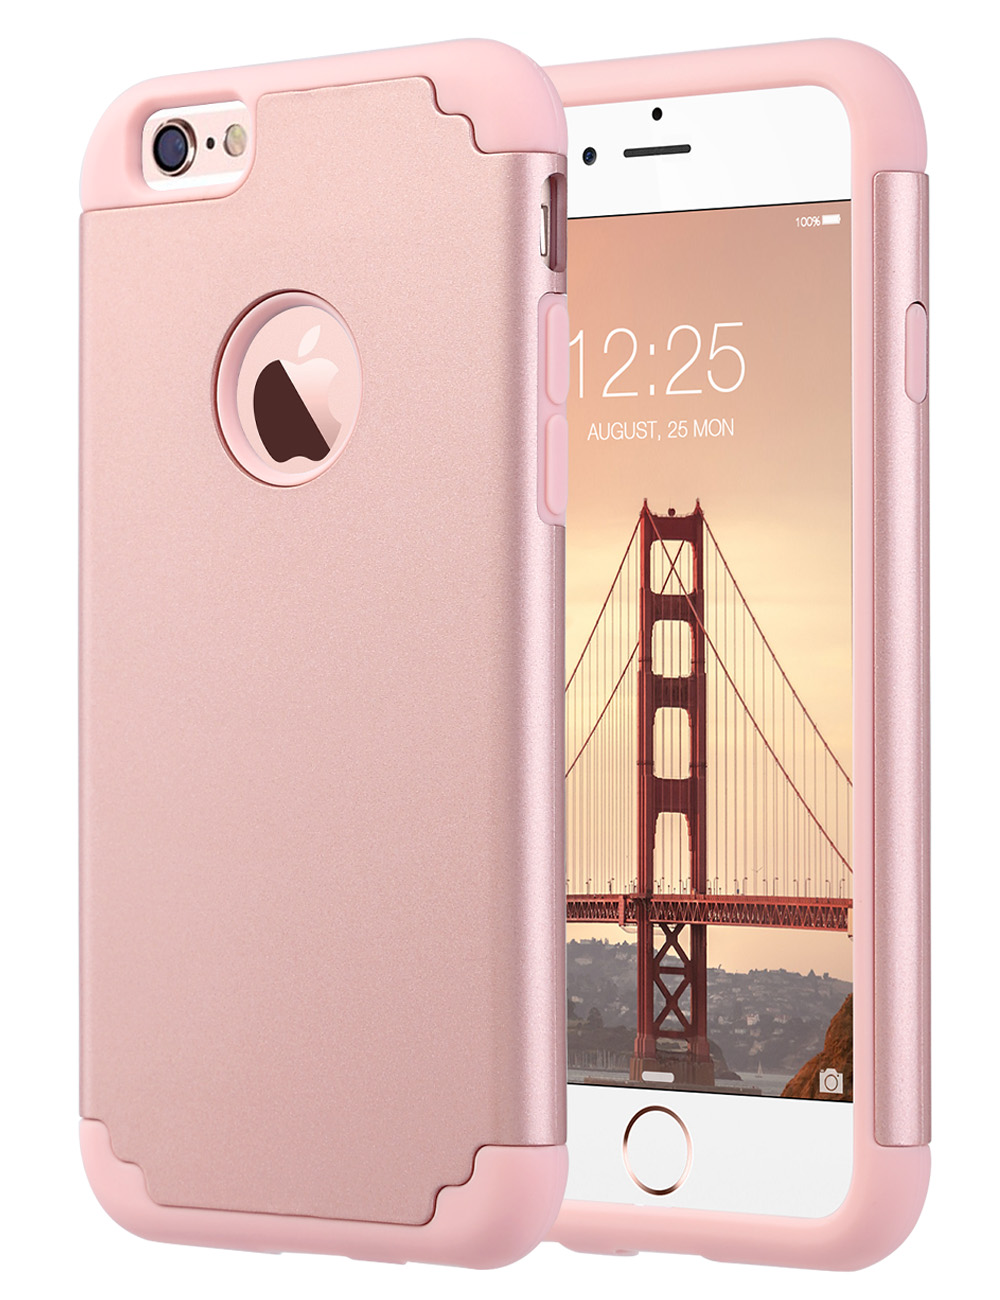 ULAK iPhone 6 Case, iPhone 6S Case, Slim Dual Layer Shockproof Bumper Phone Case for Apple iPhone 6 / 6s for Girls Women, Rose Gold - image 1 of 8